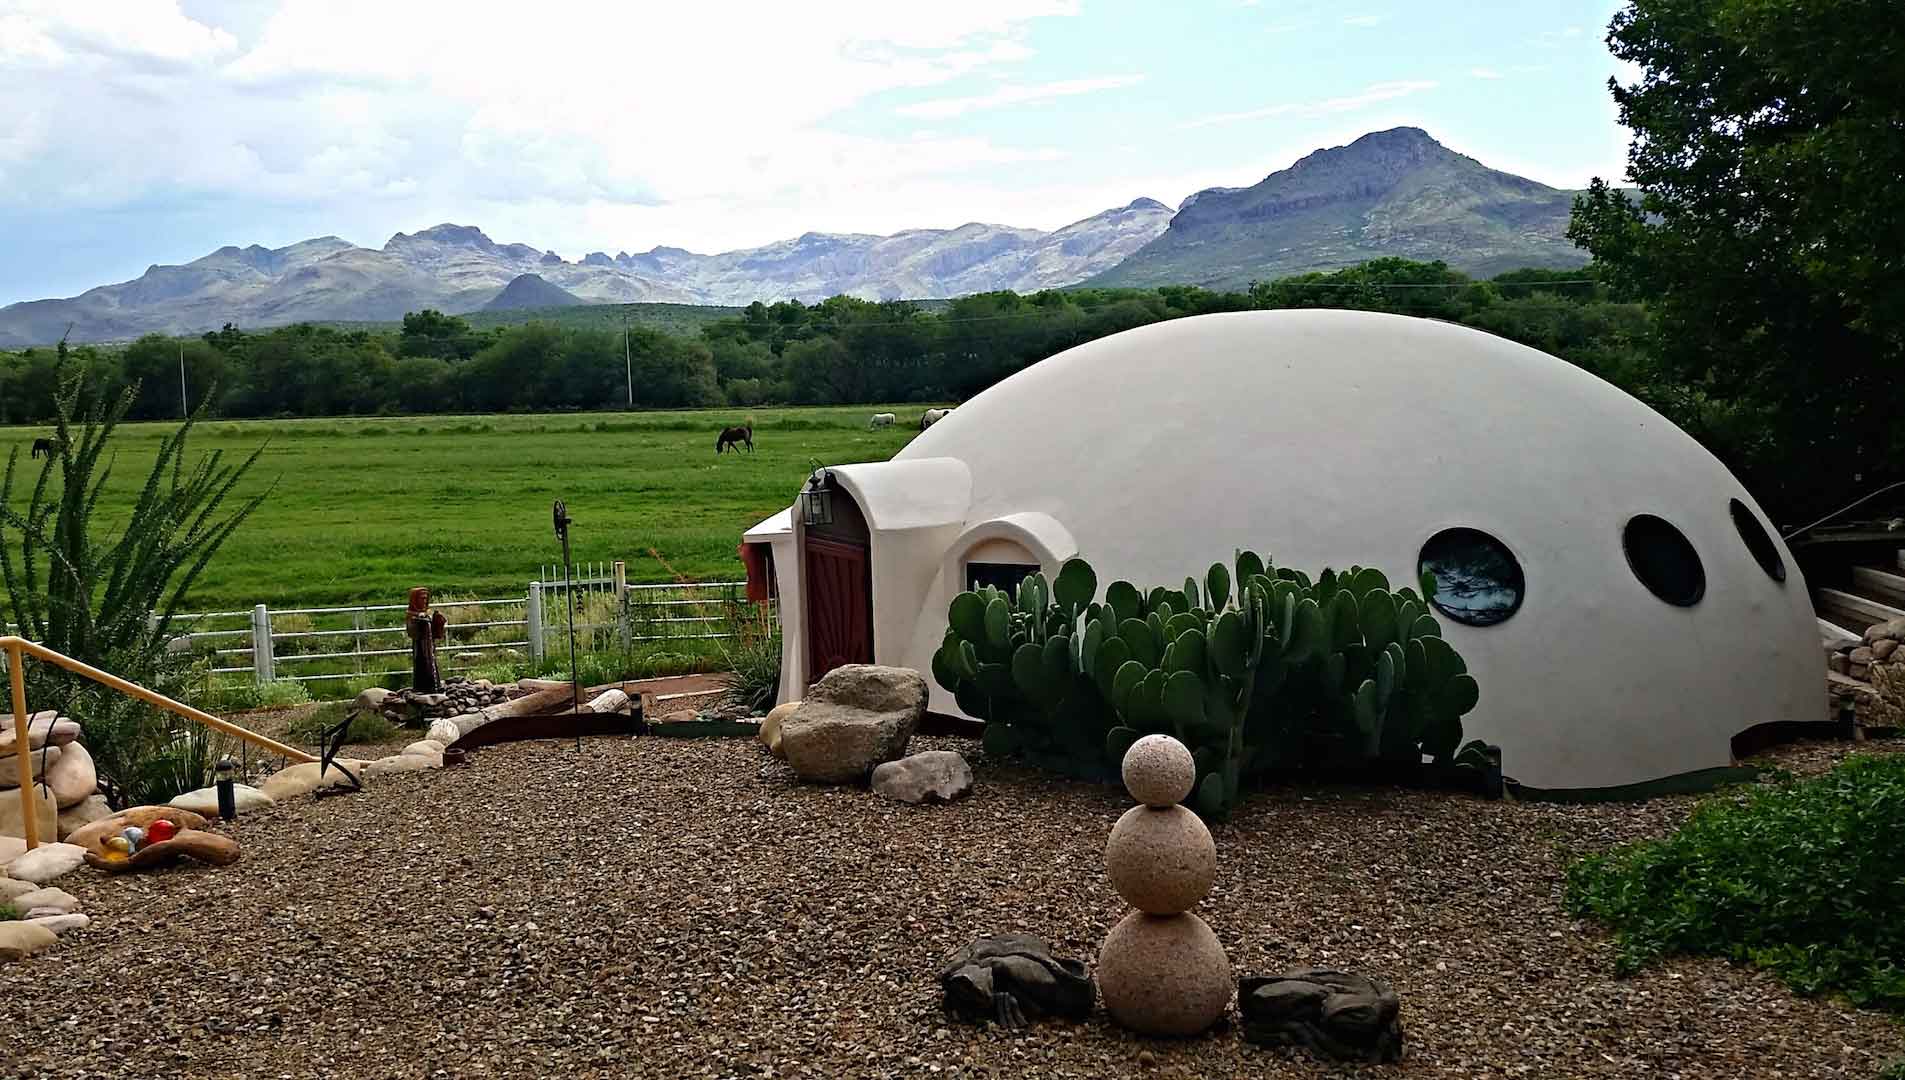 A Monolithic Dome built at Avalon Organic Gardens & EcoVillage.